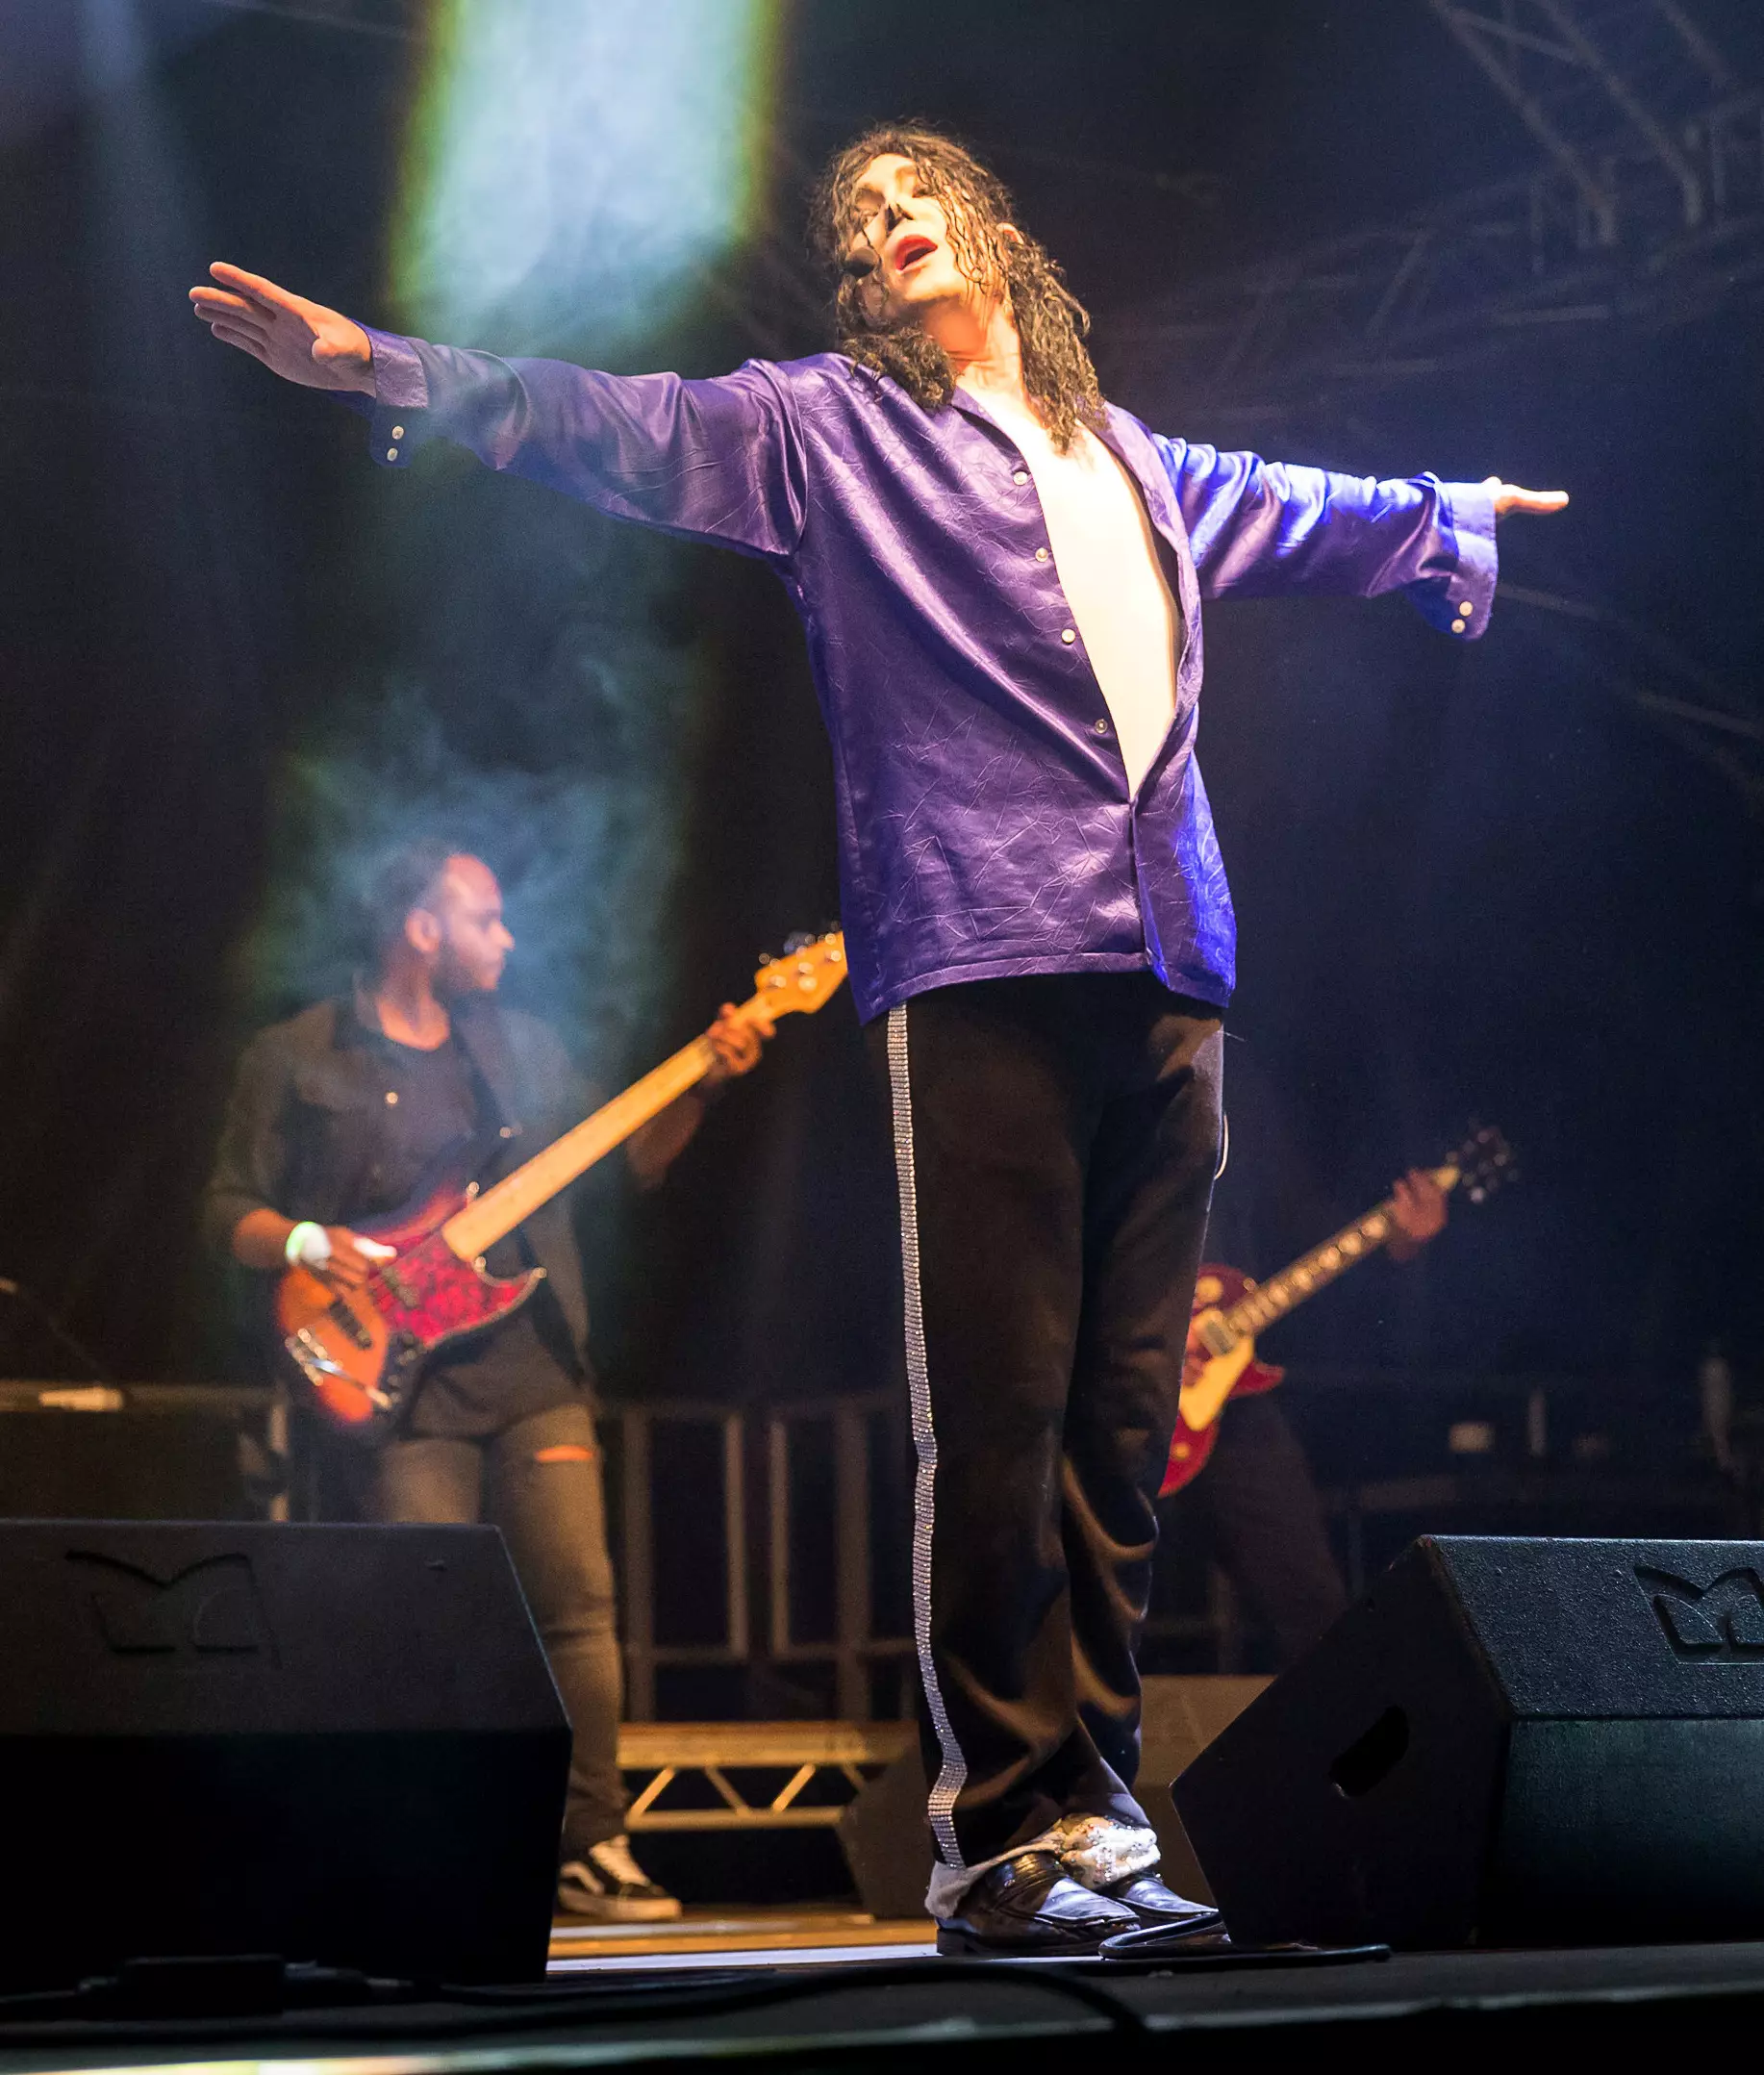 Cook performing as part of his Simply Jackson act.